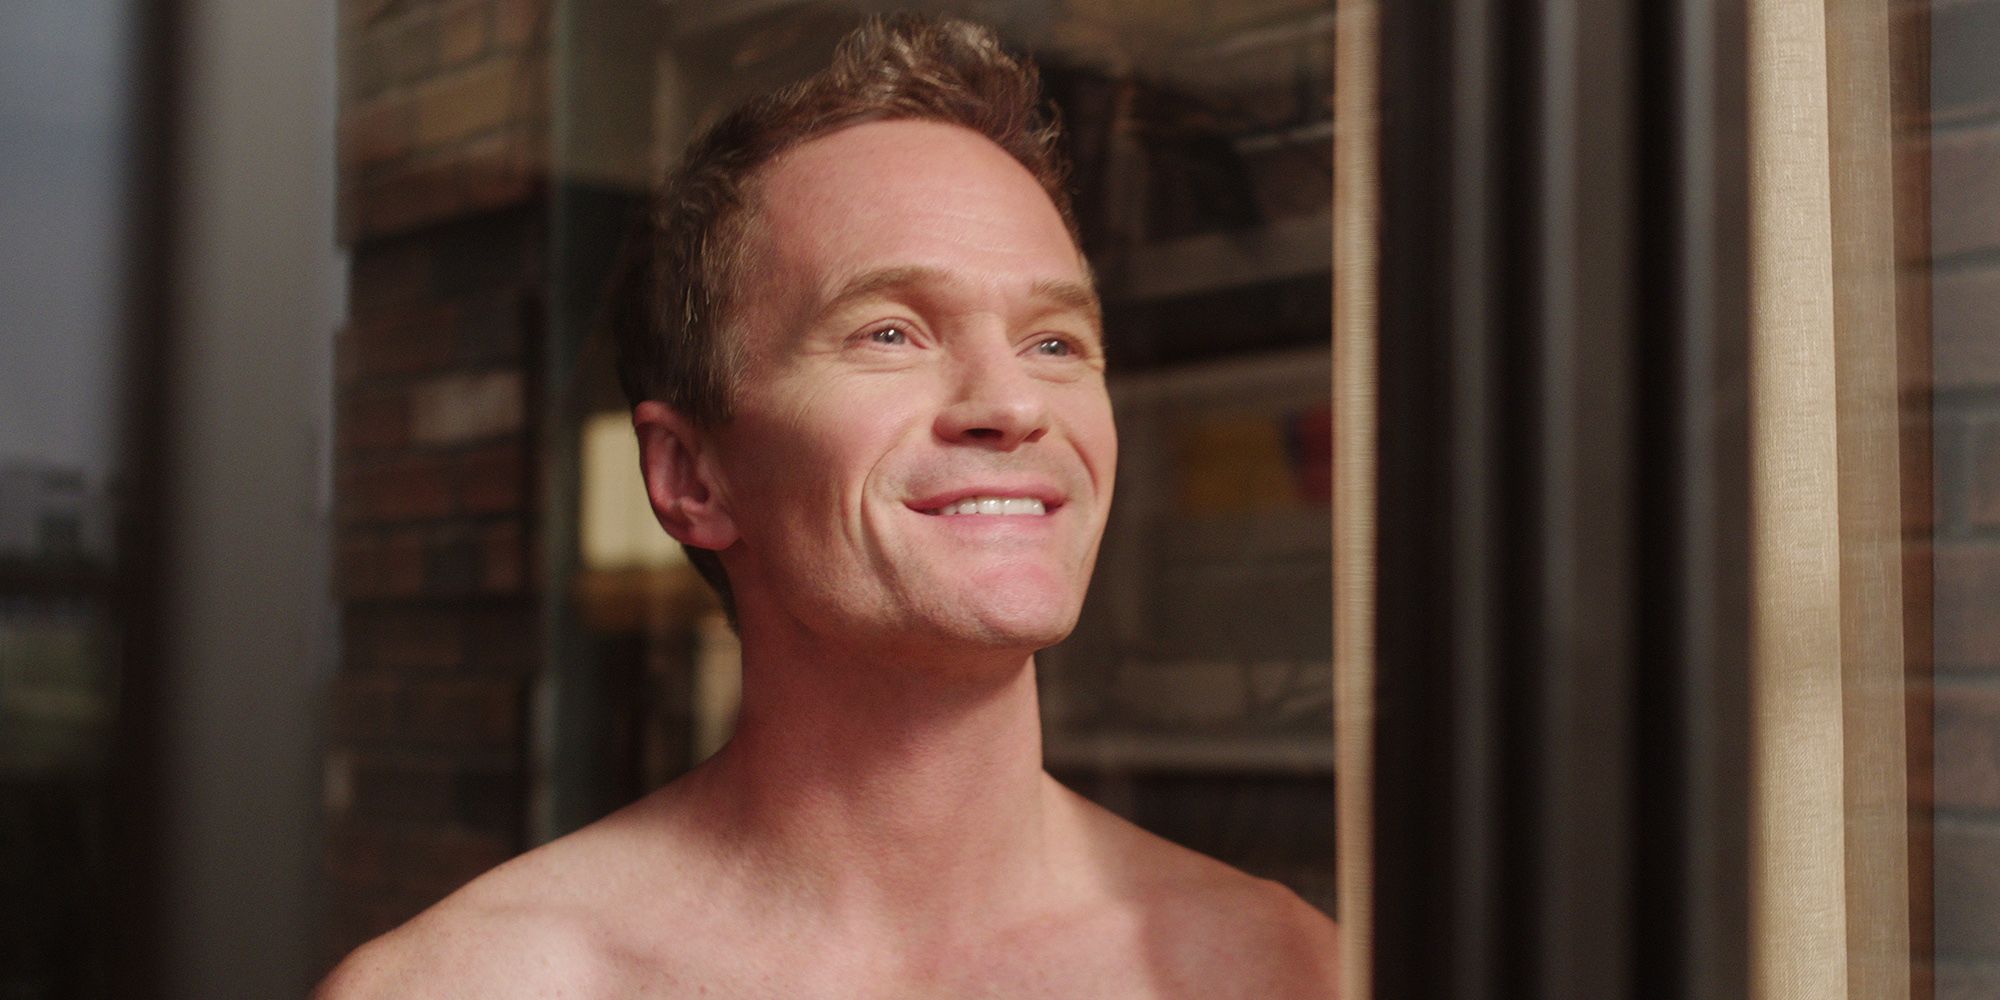 Neil Patrick Harris Staring Out the Window Shirtless and Smiling in Uncoupled